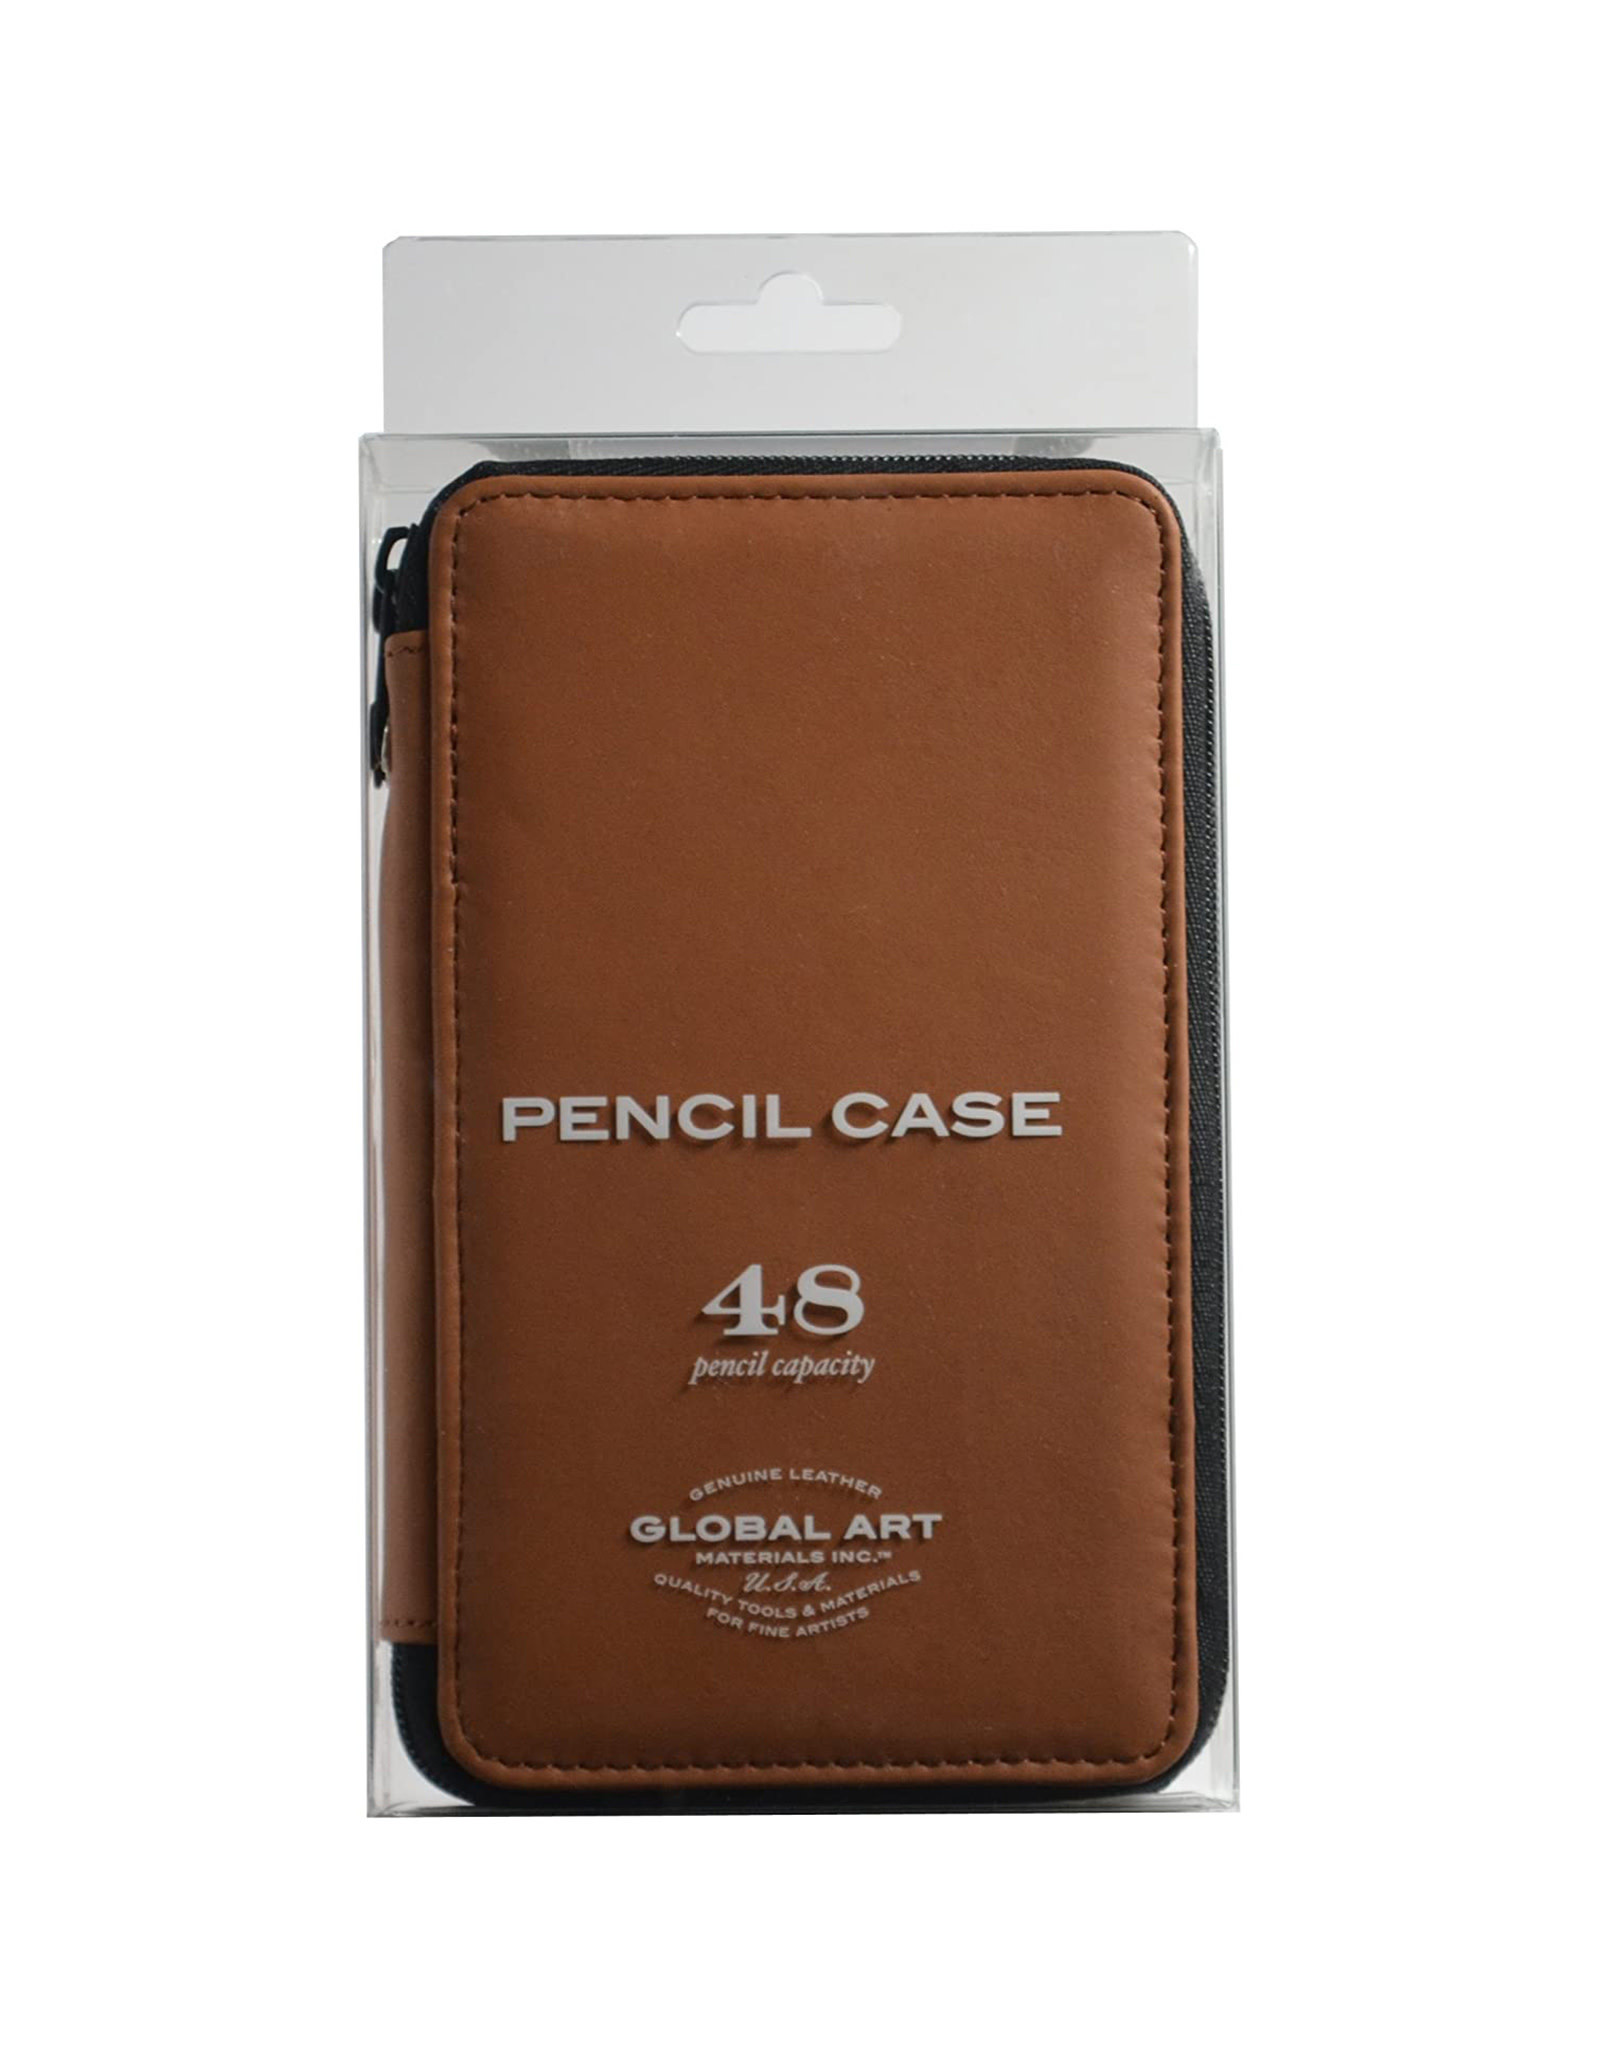 SPEEDBALL ART PRODUCTS Global Art Pencil Case, Genuine Leather, Brown, 48 Pencils